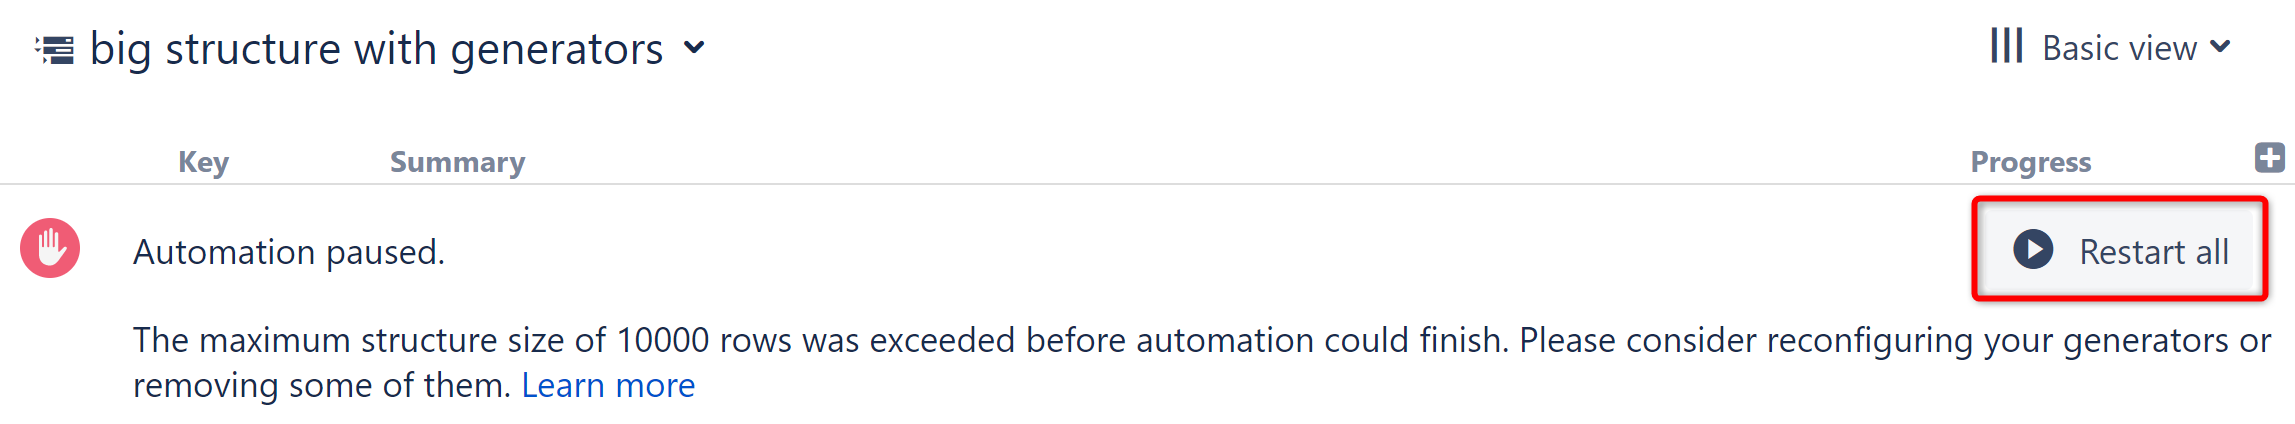 Restart all button to resume paused automation